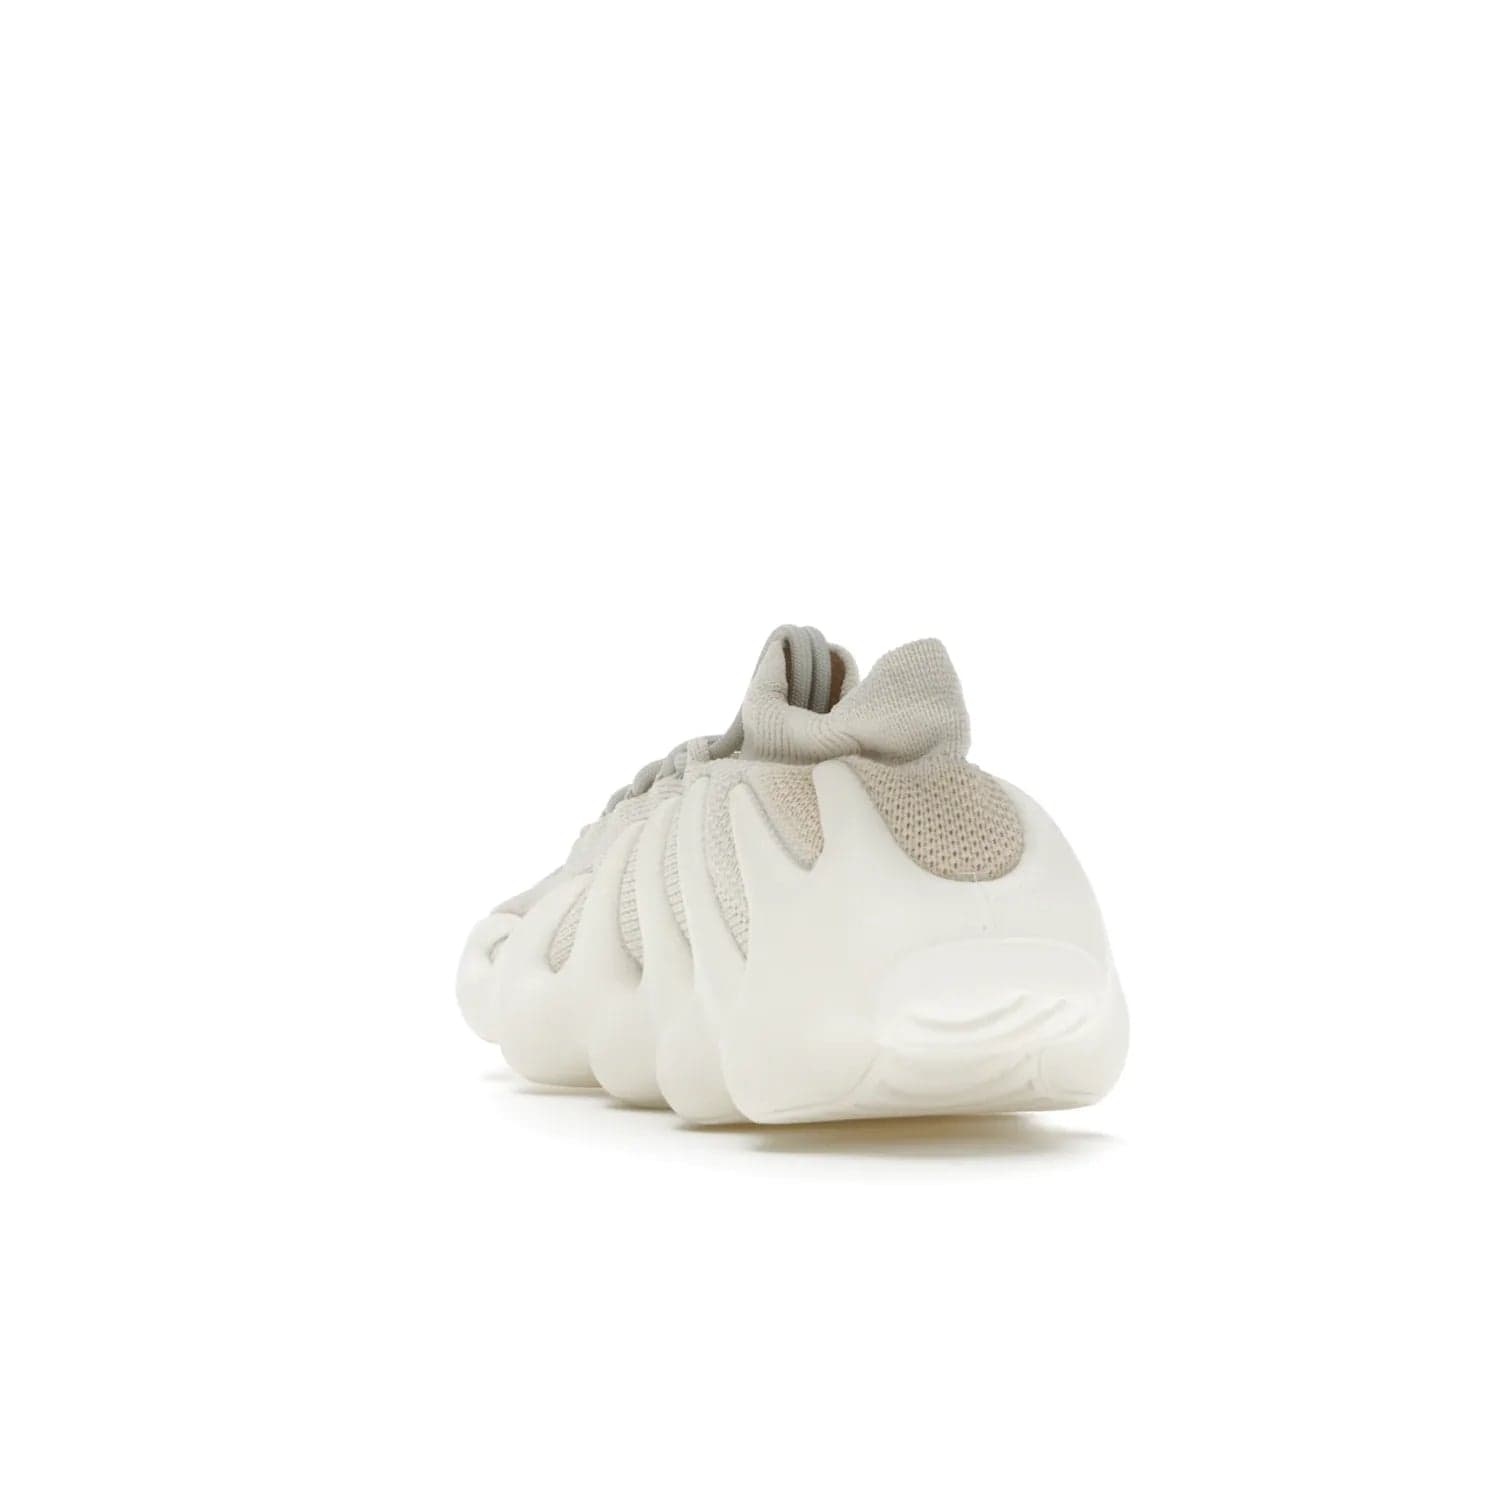 adidas Yeezy 450 Cloud White - Image 26 - Only at www.BallersClubKickz.com - Experience the future with the adidas Yeezy 450 Cloud White. A two-piece design featuring an extreme foam sole and mesh upper, this silhouette is expected to release in March 2021. Get your hands on this striking Cloud White/Cloud White colorway and stand out in the crowd.